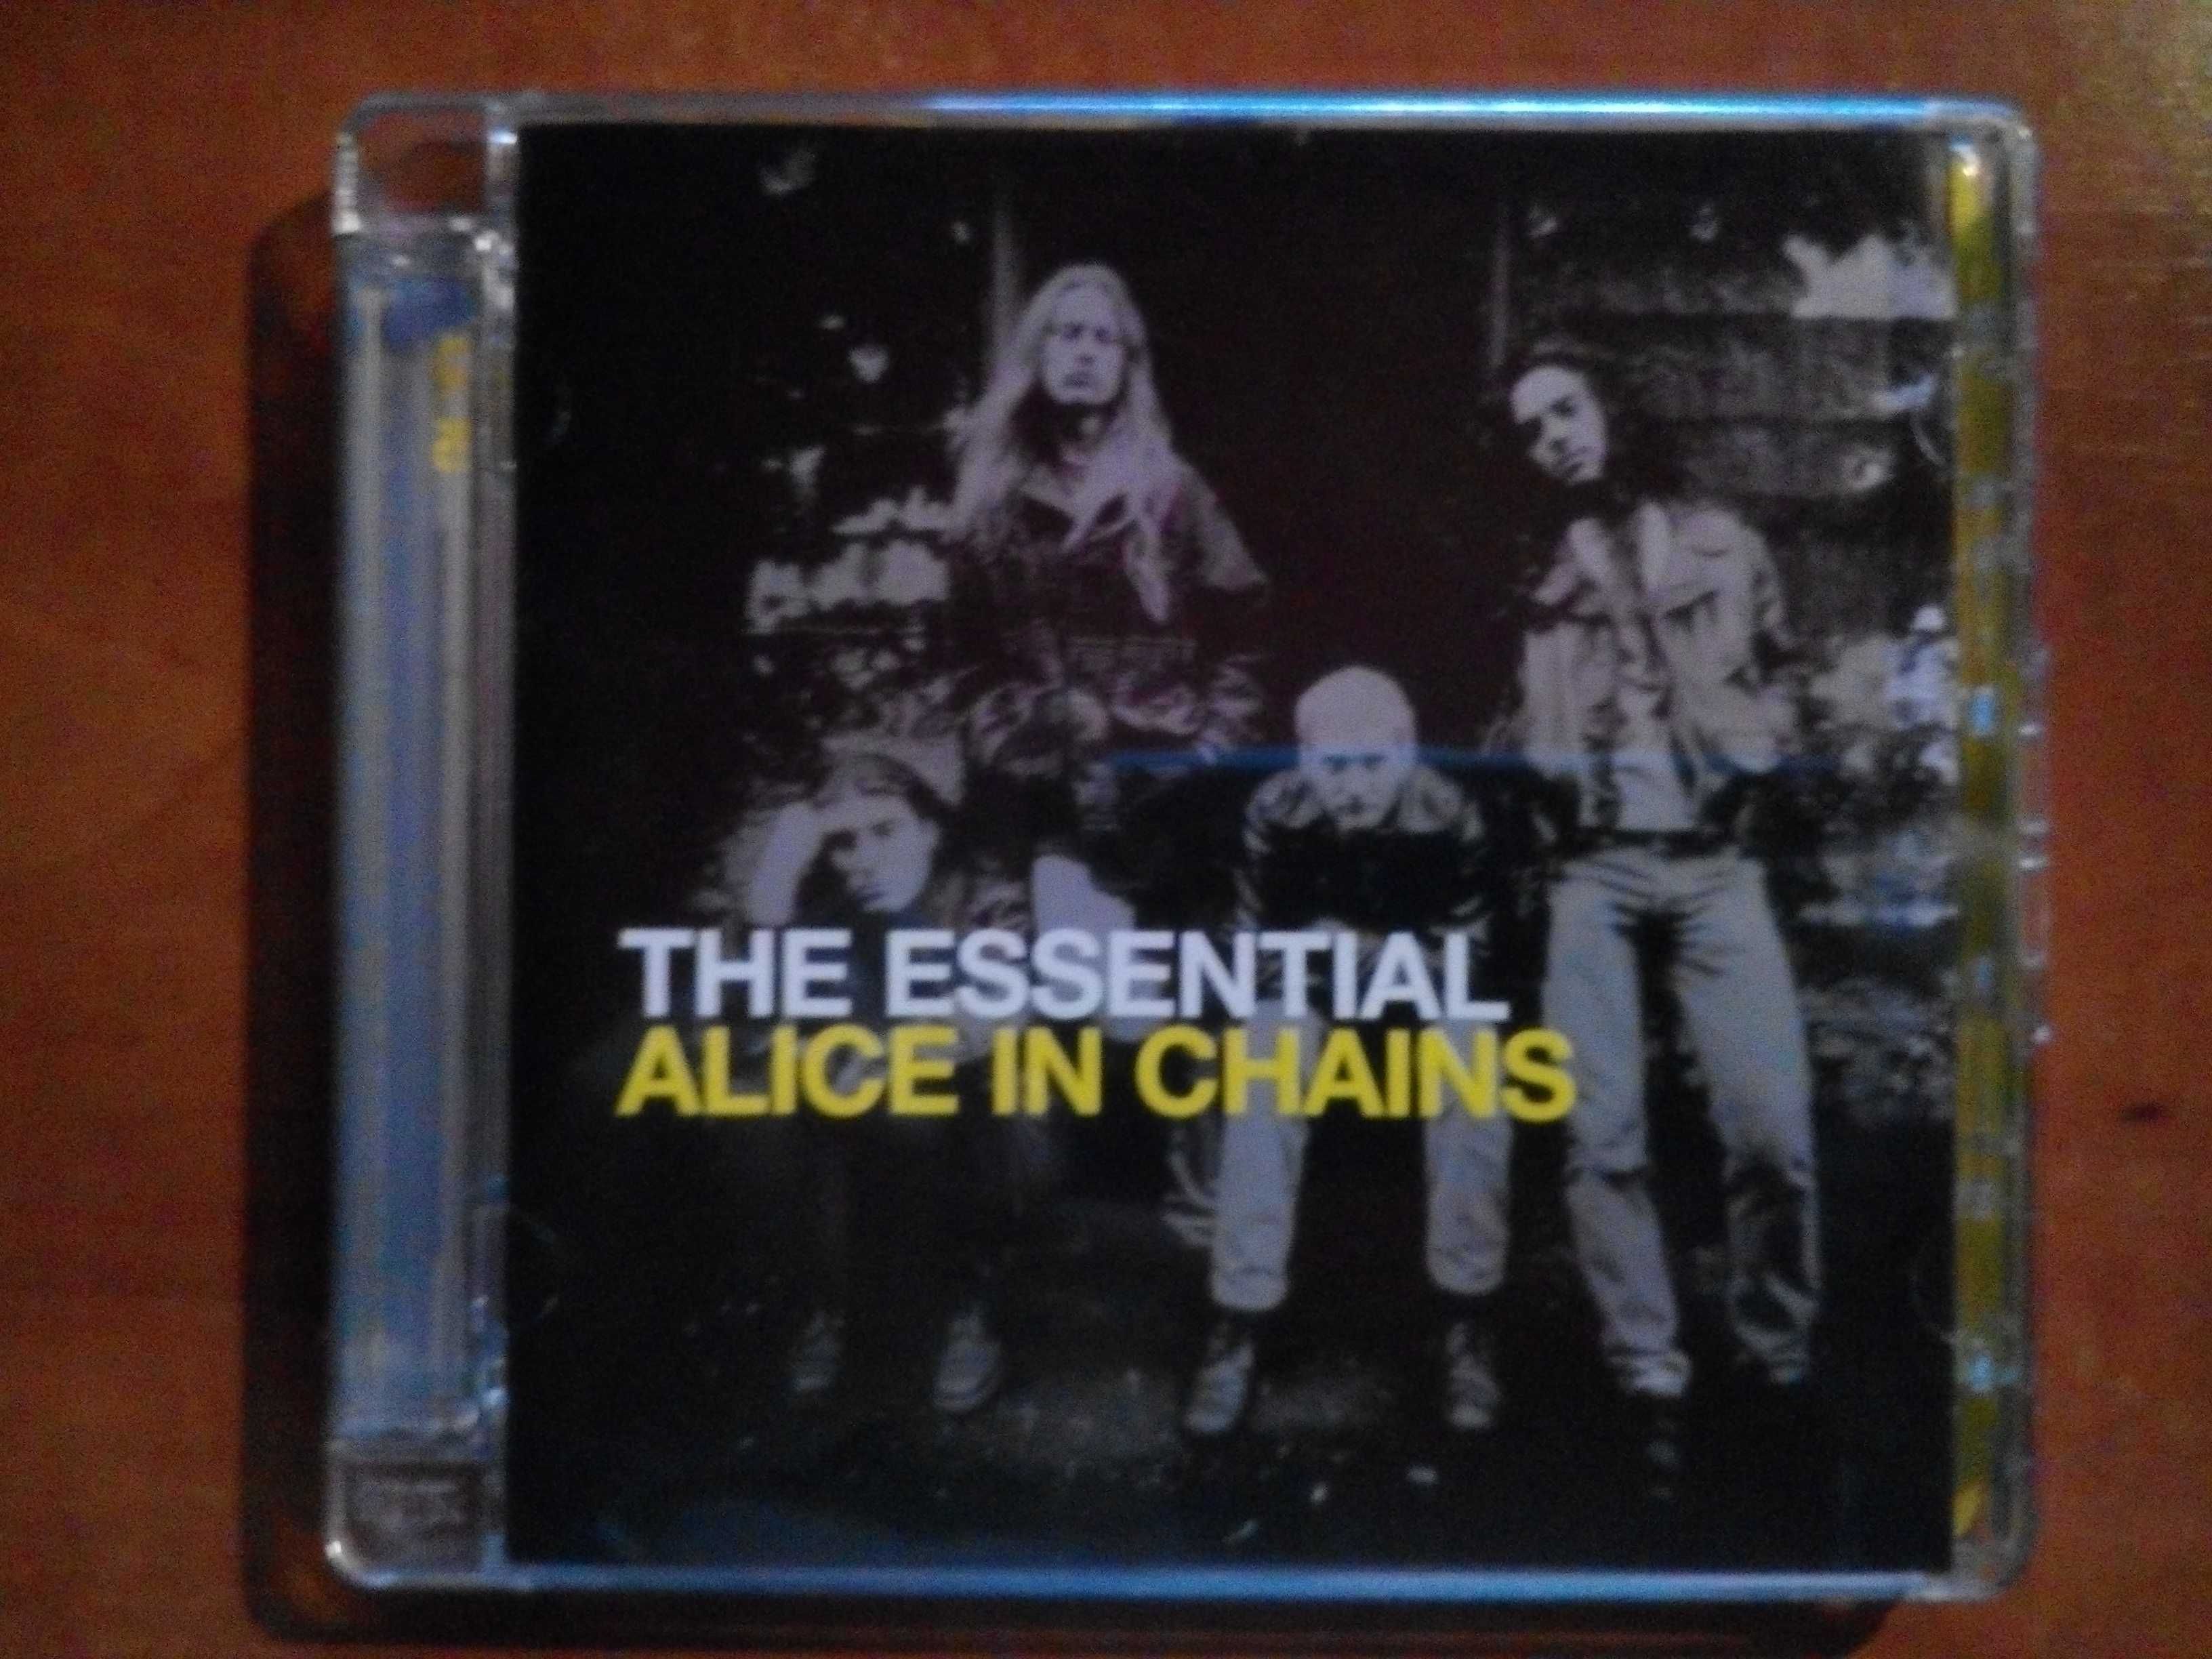 Cd "The Essential Alice in Chains"